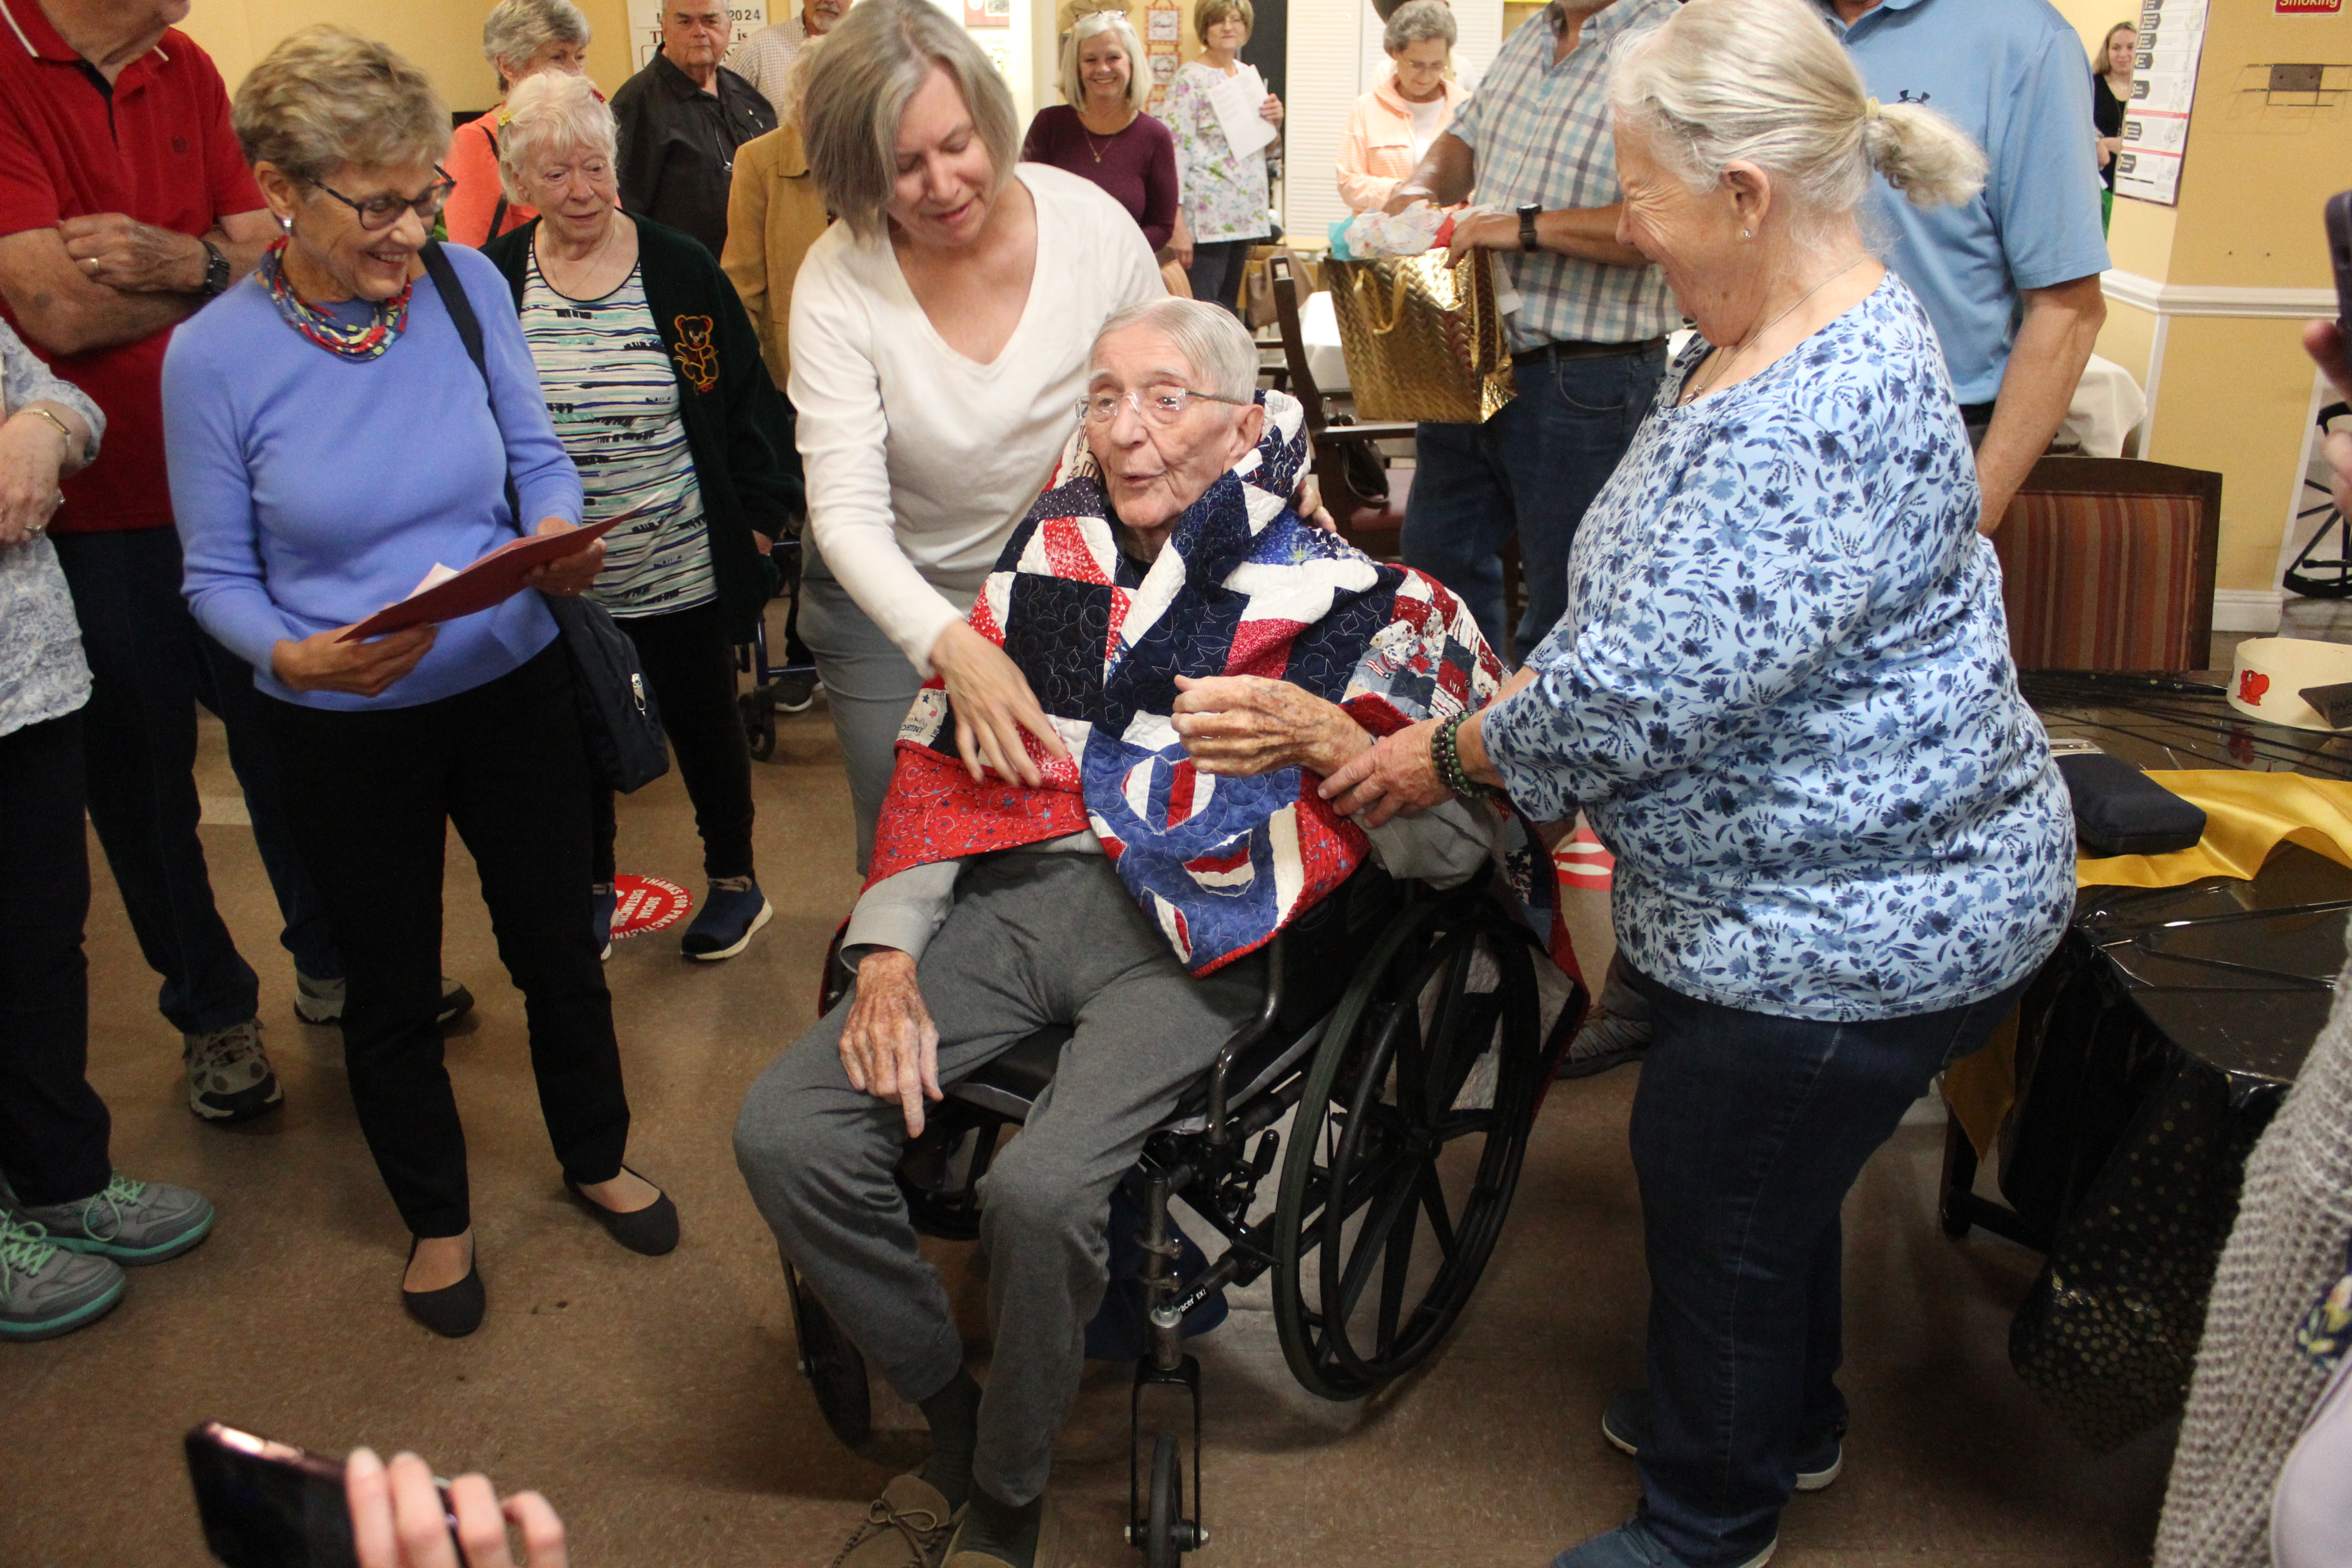 From left, Smoky Mountain Quilters Becky Painter, Janet McDonald and Margaret Varner present Arnold Price with a Quilt of Valor during a celebration for his 100th birthday.